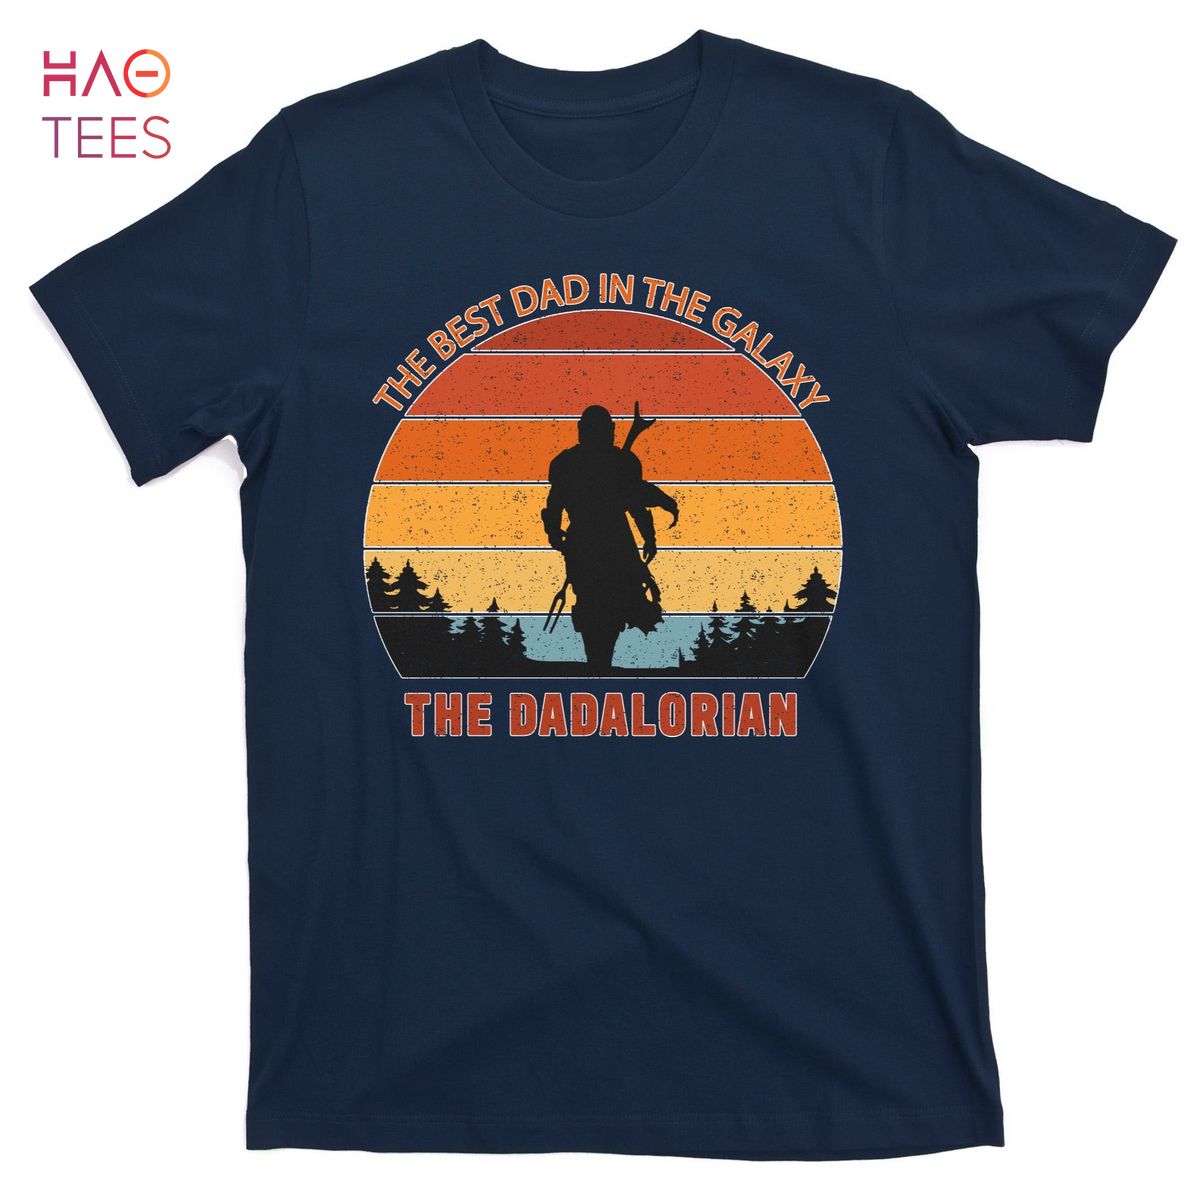 HOT The Dadalorian Best Dad in The Galaxy Retro Vintage T-Shirts